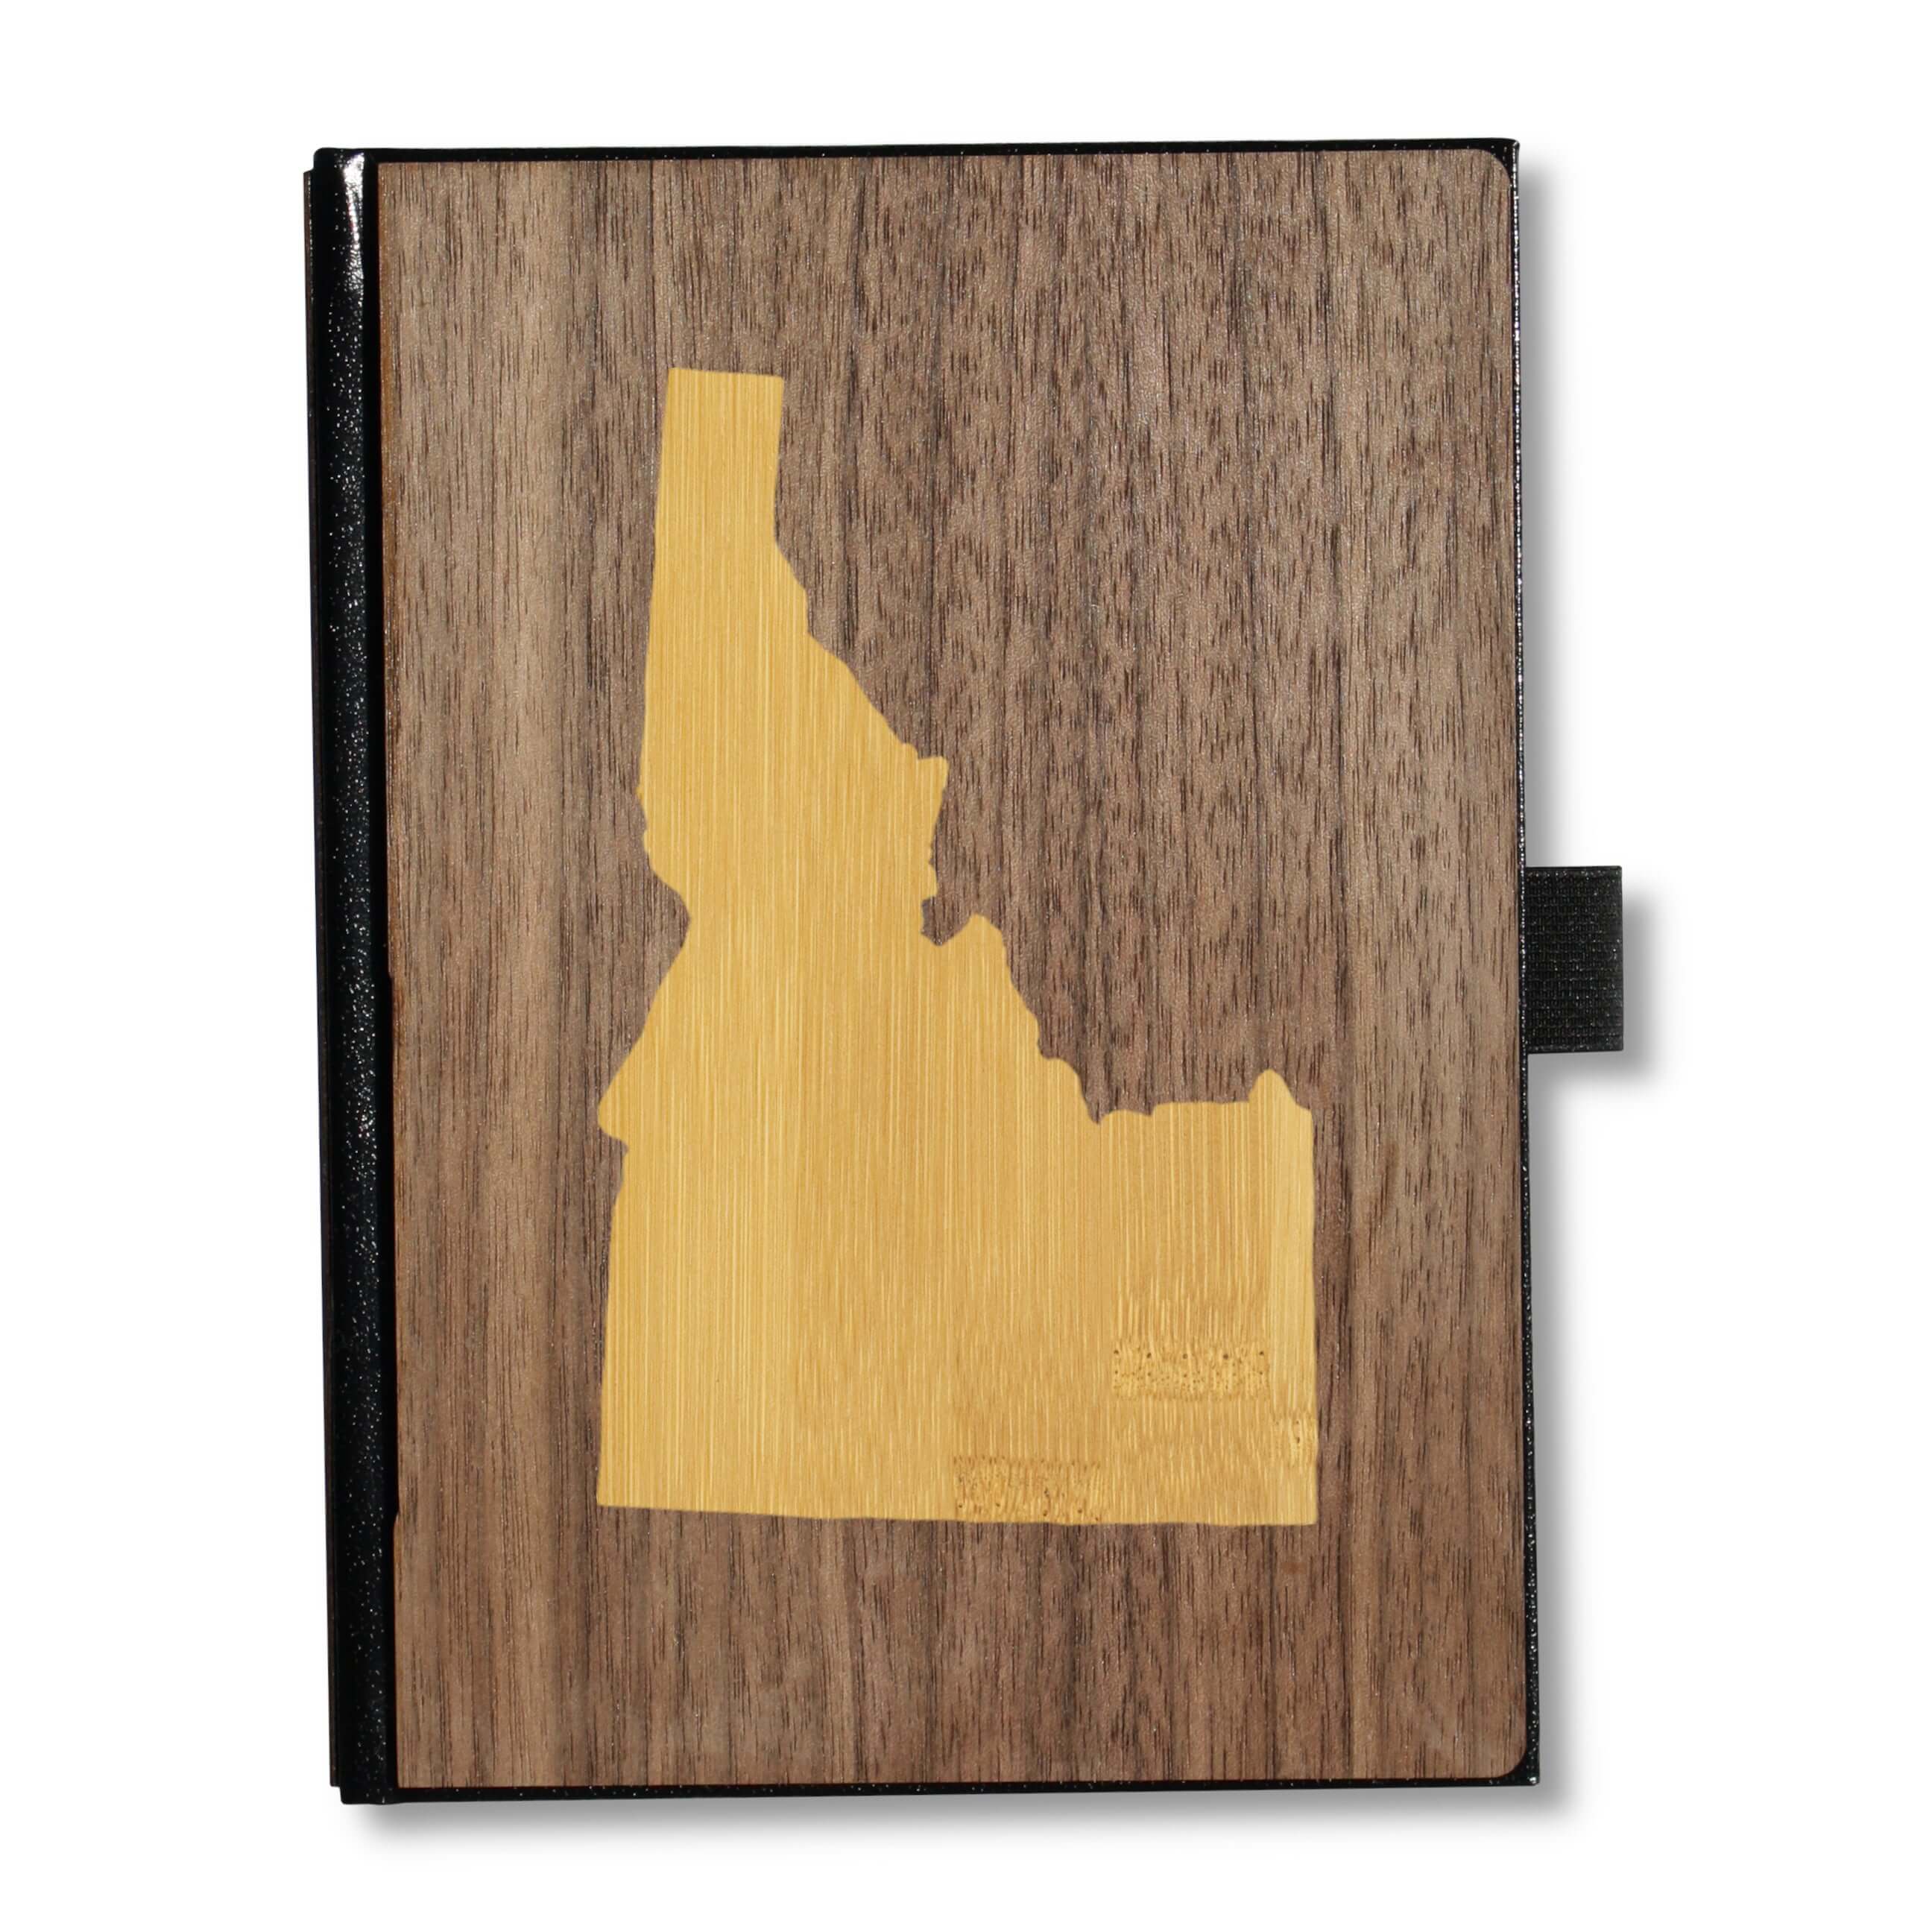 Handcrafted Wooden Journal / Planner / Notebook (Idaho State Inlay in Walnut & Bamboo)